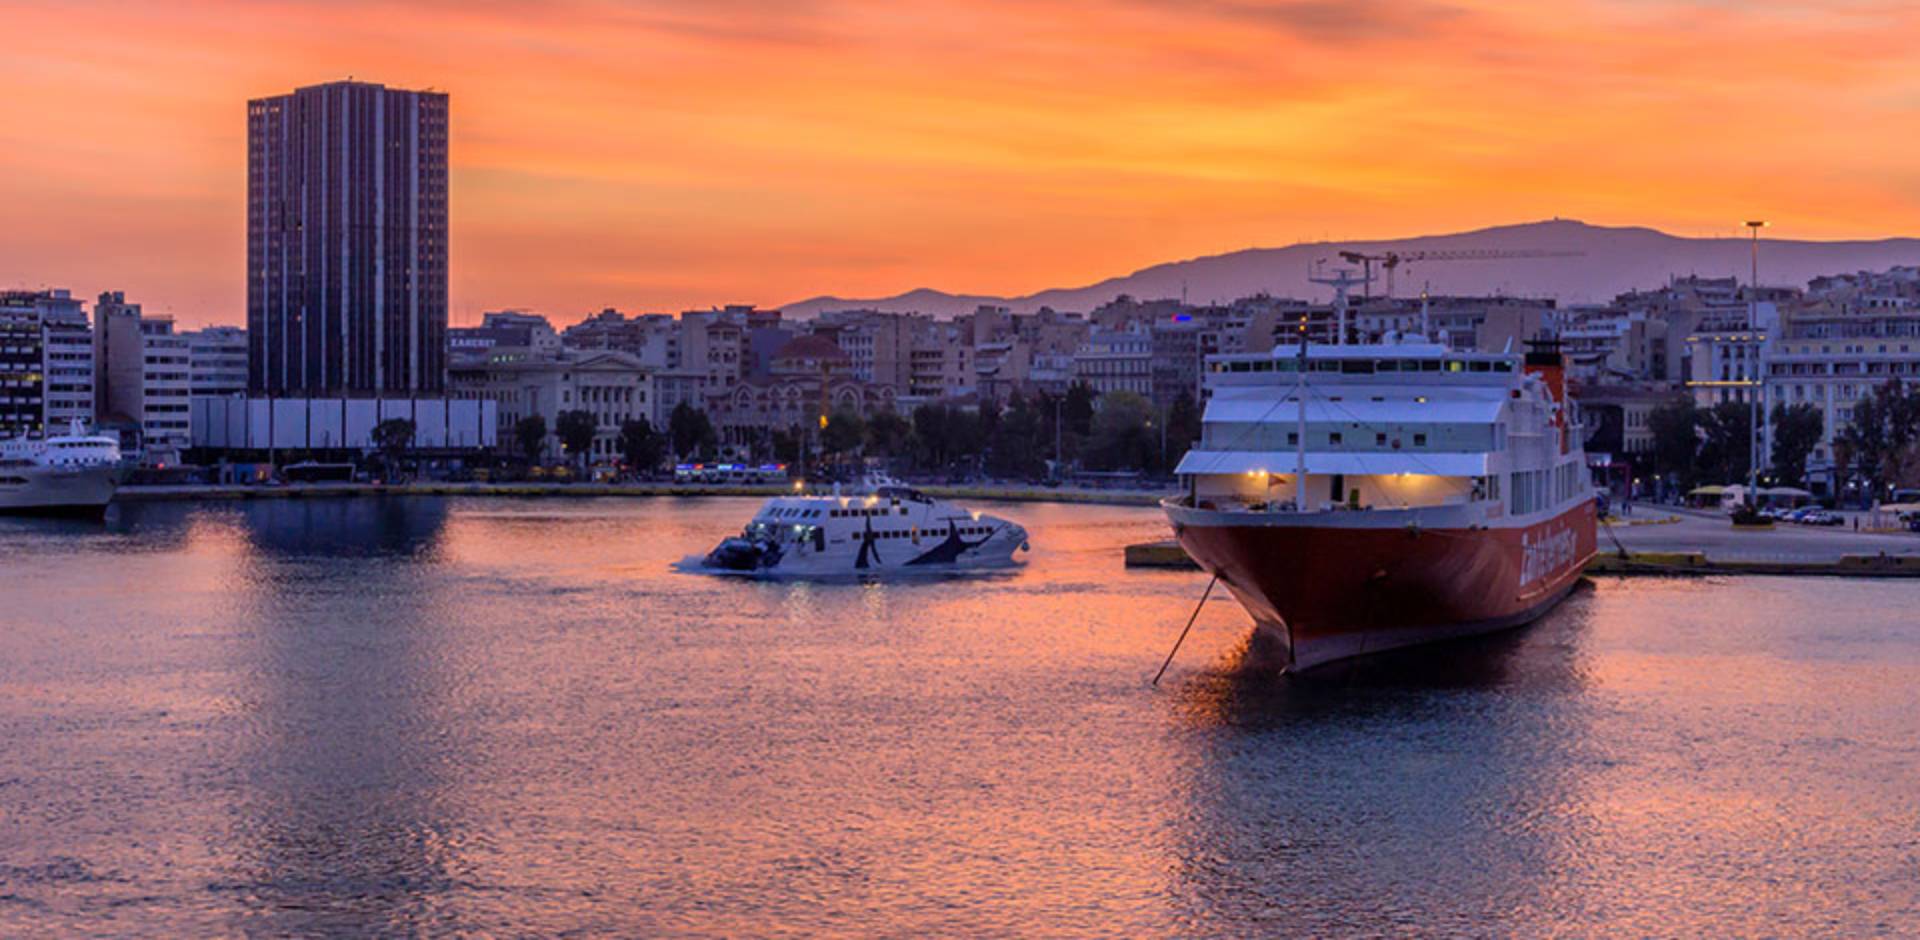 ATHENS PORTS: YOUR GUIDE TO THE ISLANDS